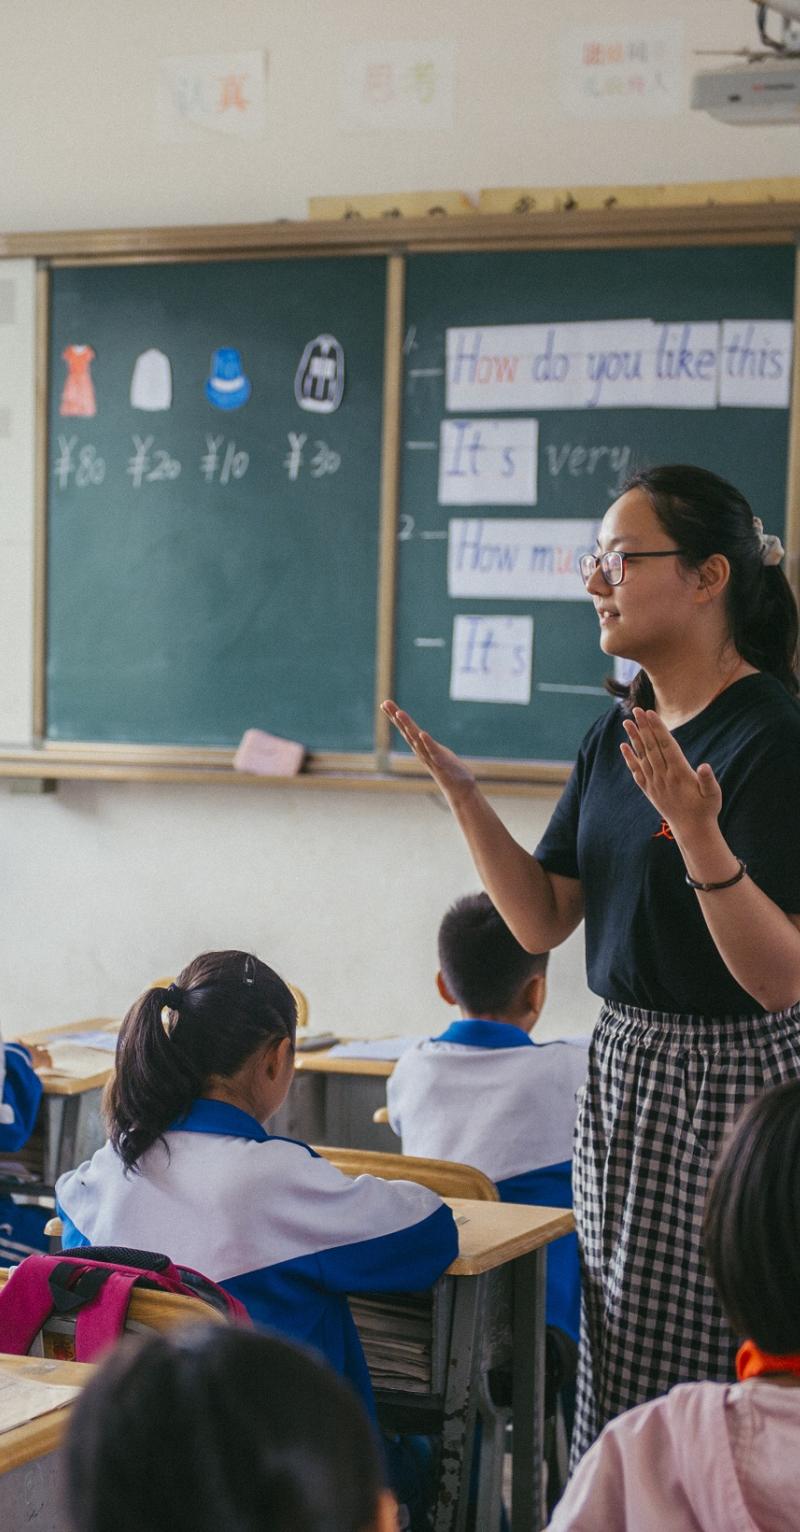 A young Asian woman stands in a classroom in with a chalkboard behind her among students wearing white shirts seated in desks 